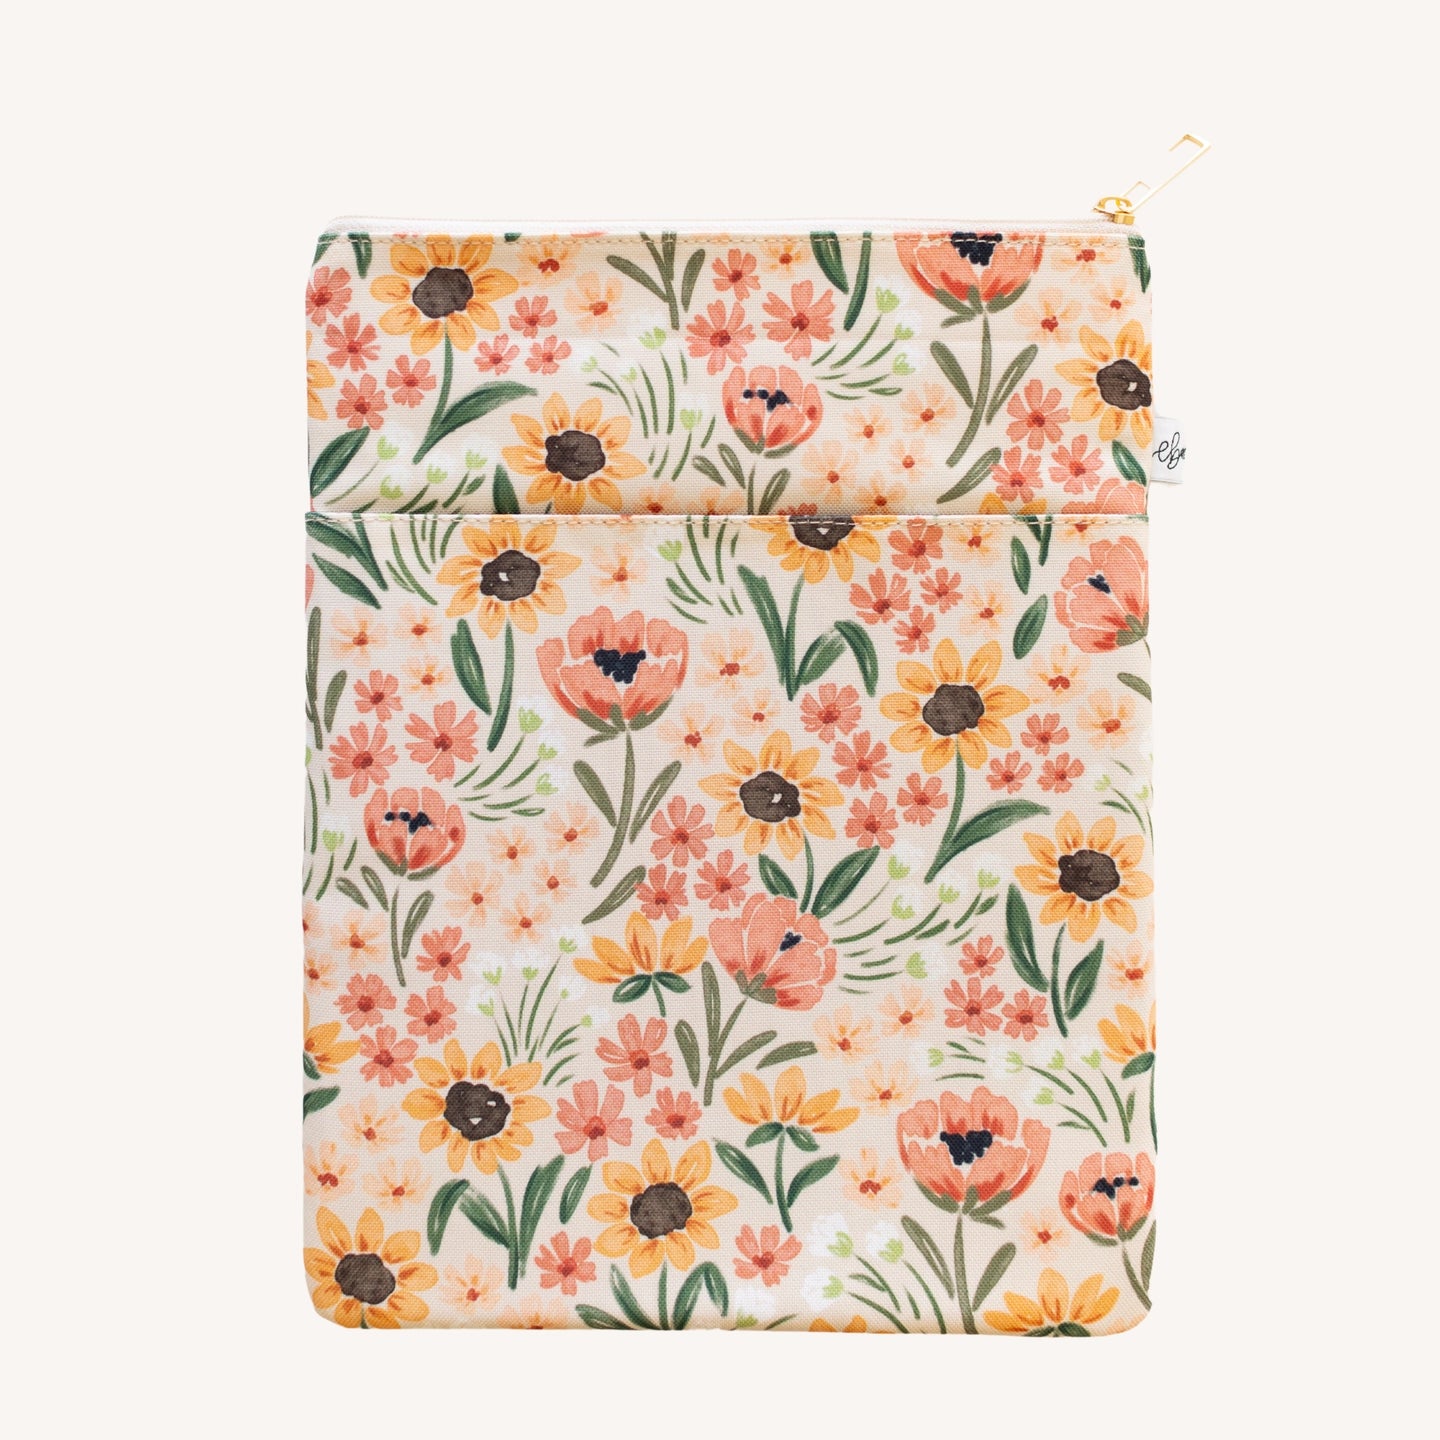 Sunny Poppies Tablet Sleeve